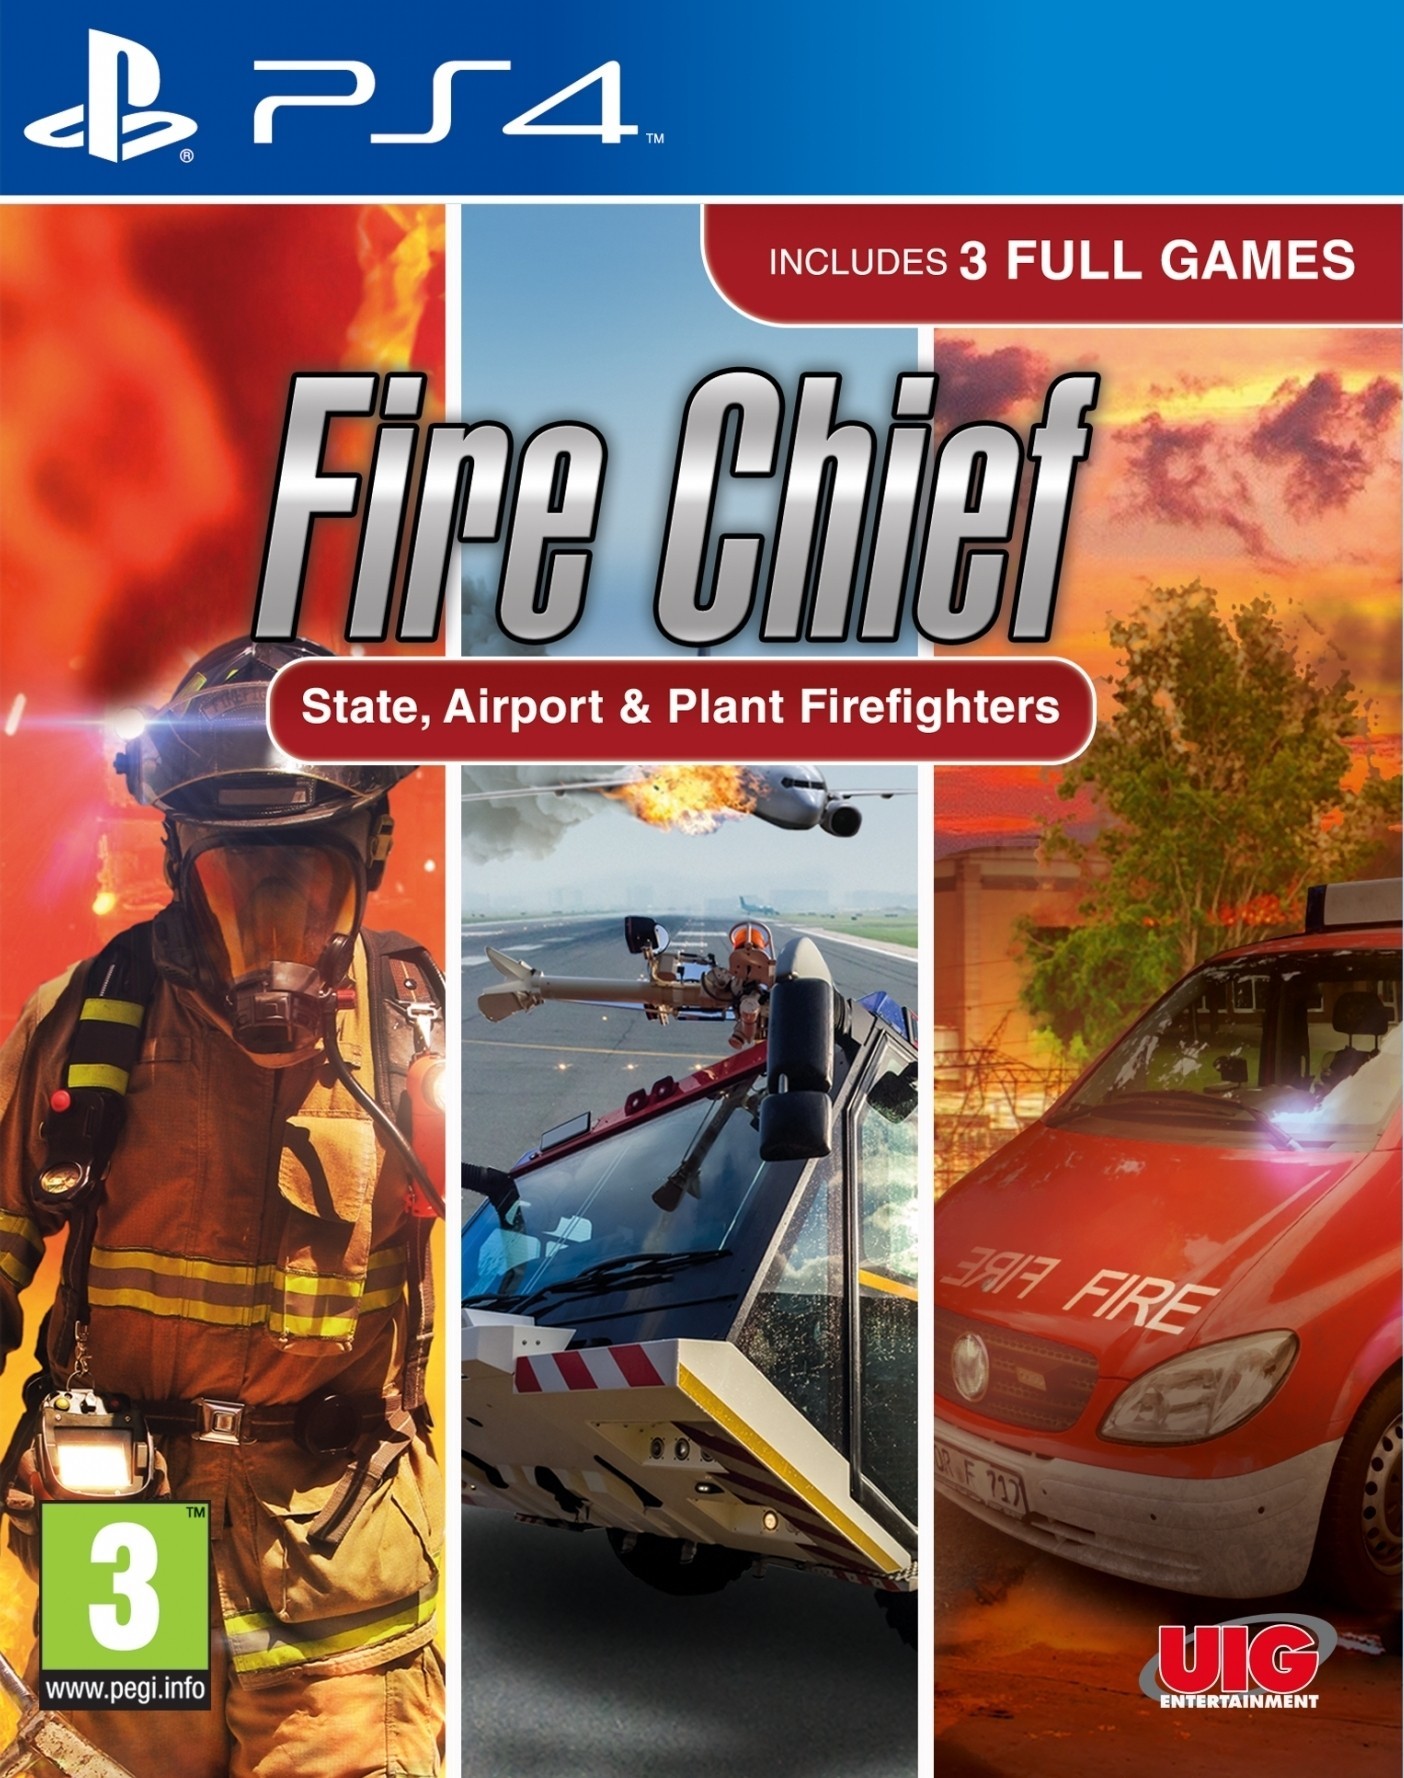 The Lifesavers: State, Airport & Plant Firefighters (PS4), UIG Entertainment